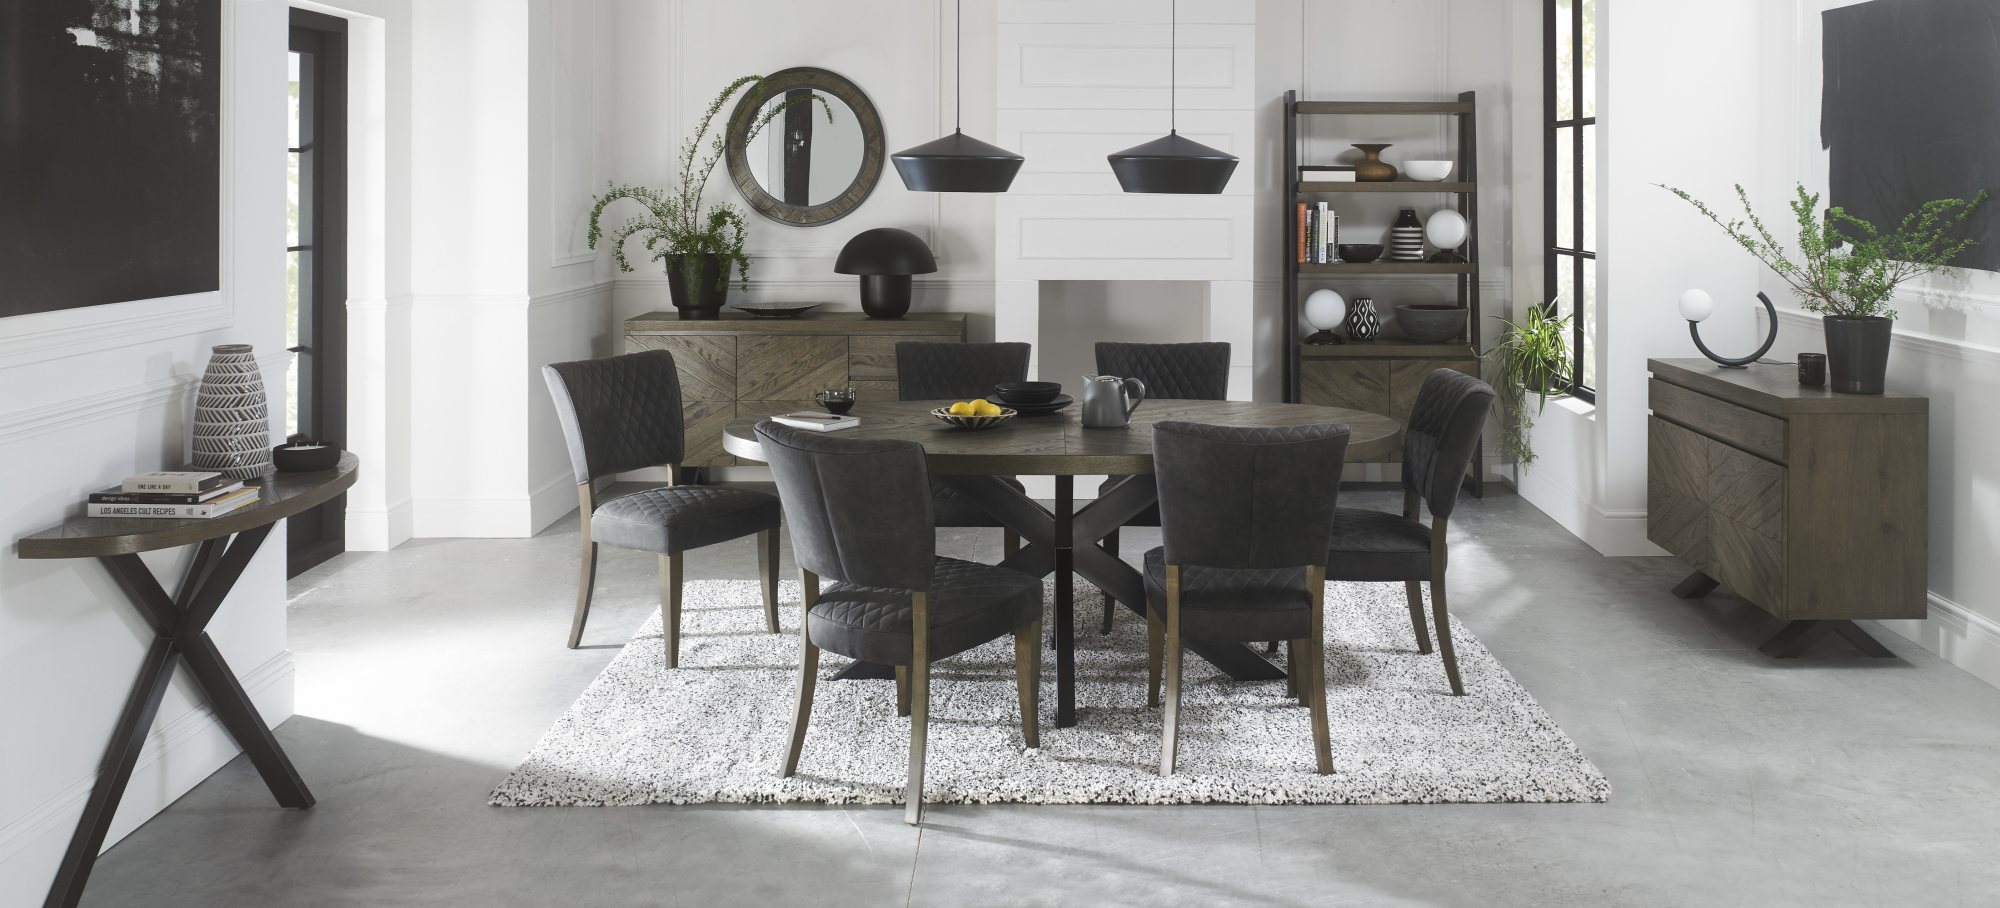 Home Origins Bosco Fumed Oak 6 Seater Dining Table & 6 Constable Fumed Oak Upholstered Chairs- Dark Grey Fabric- lifestyle